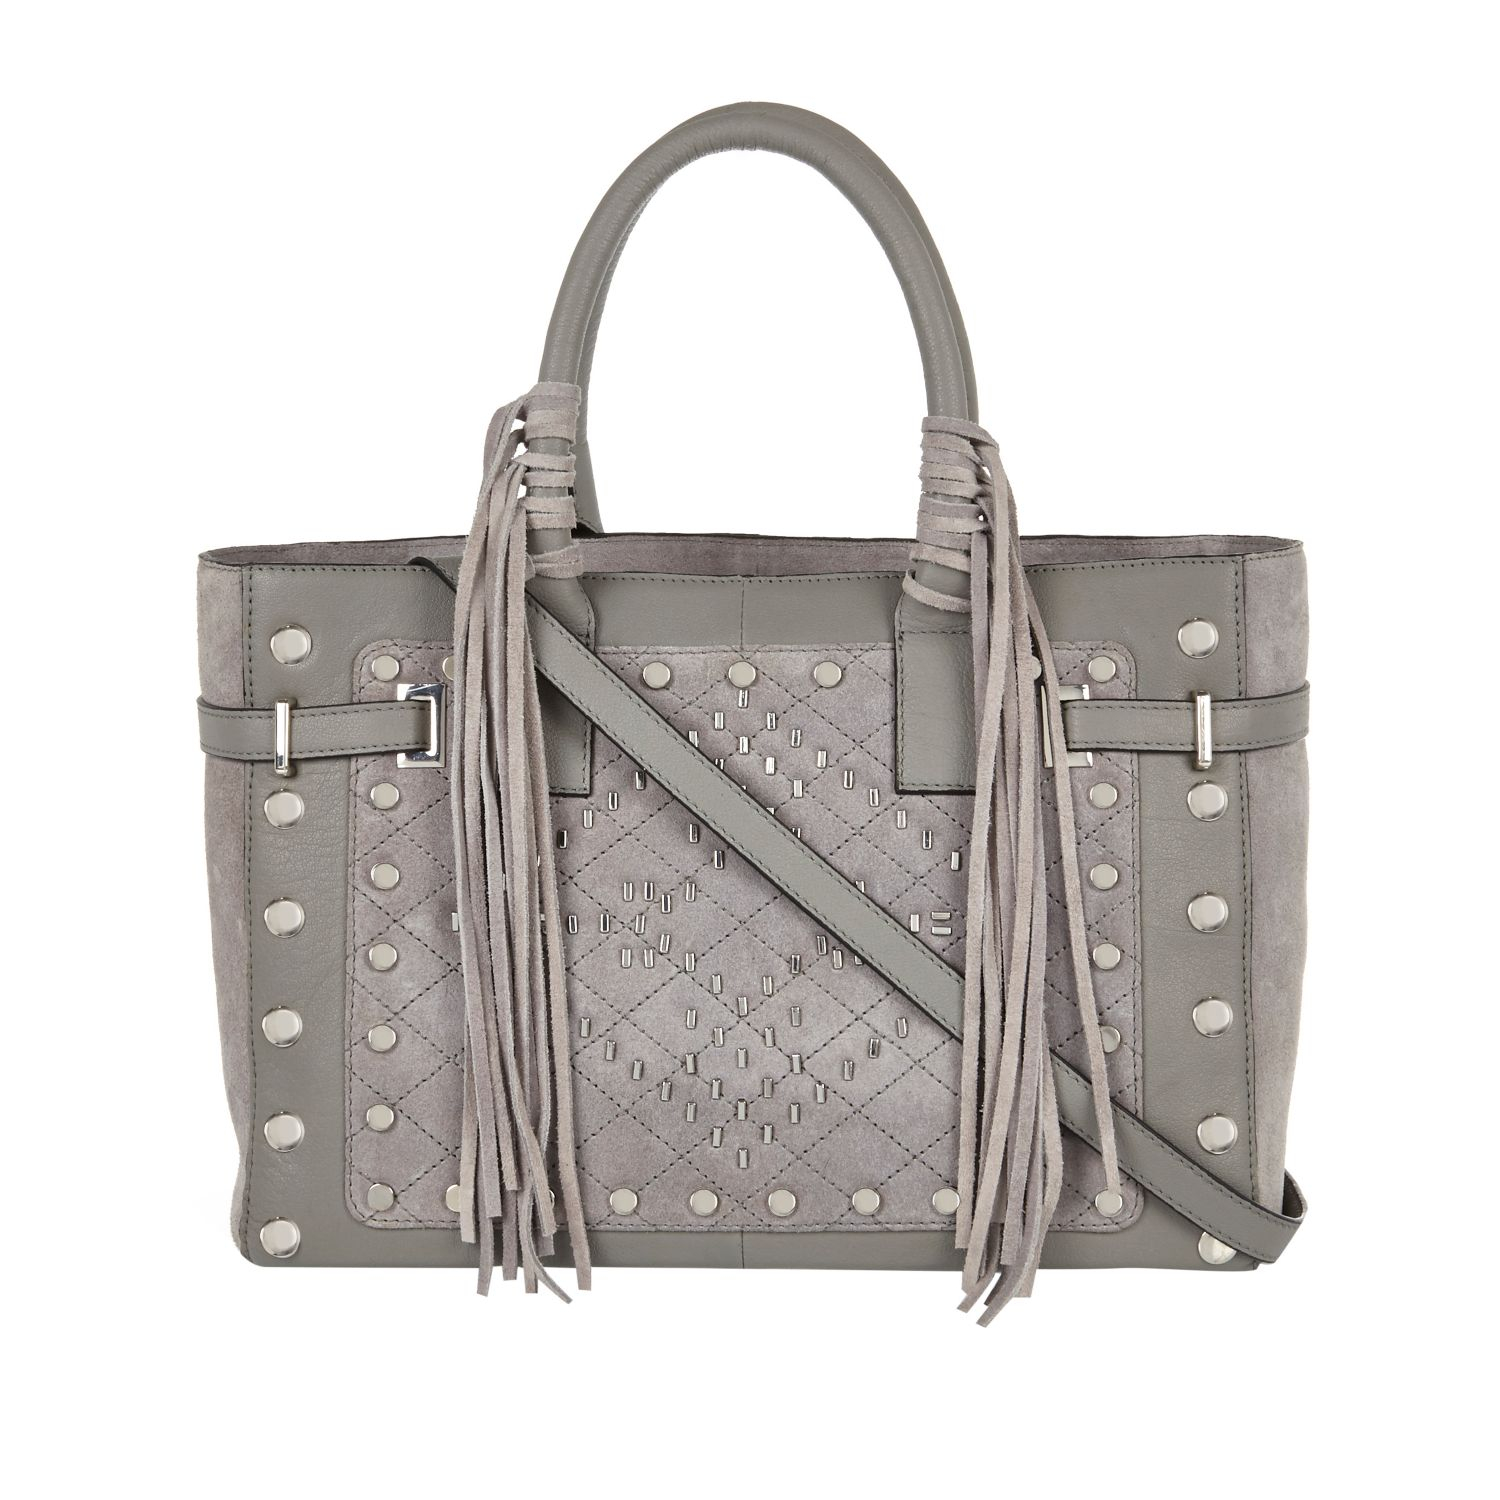 River Island Gray Grey Leather Stud Fringed Tote Bag Product 1 25981163 0 711218855 Normal 